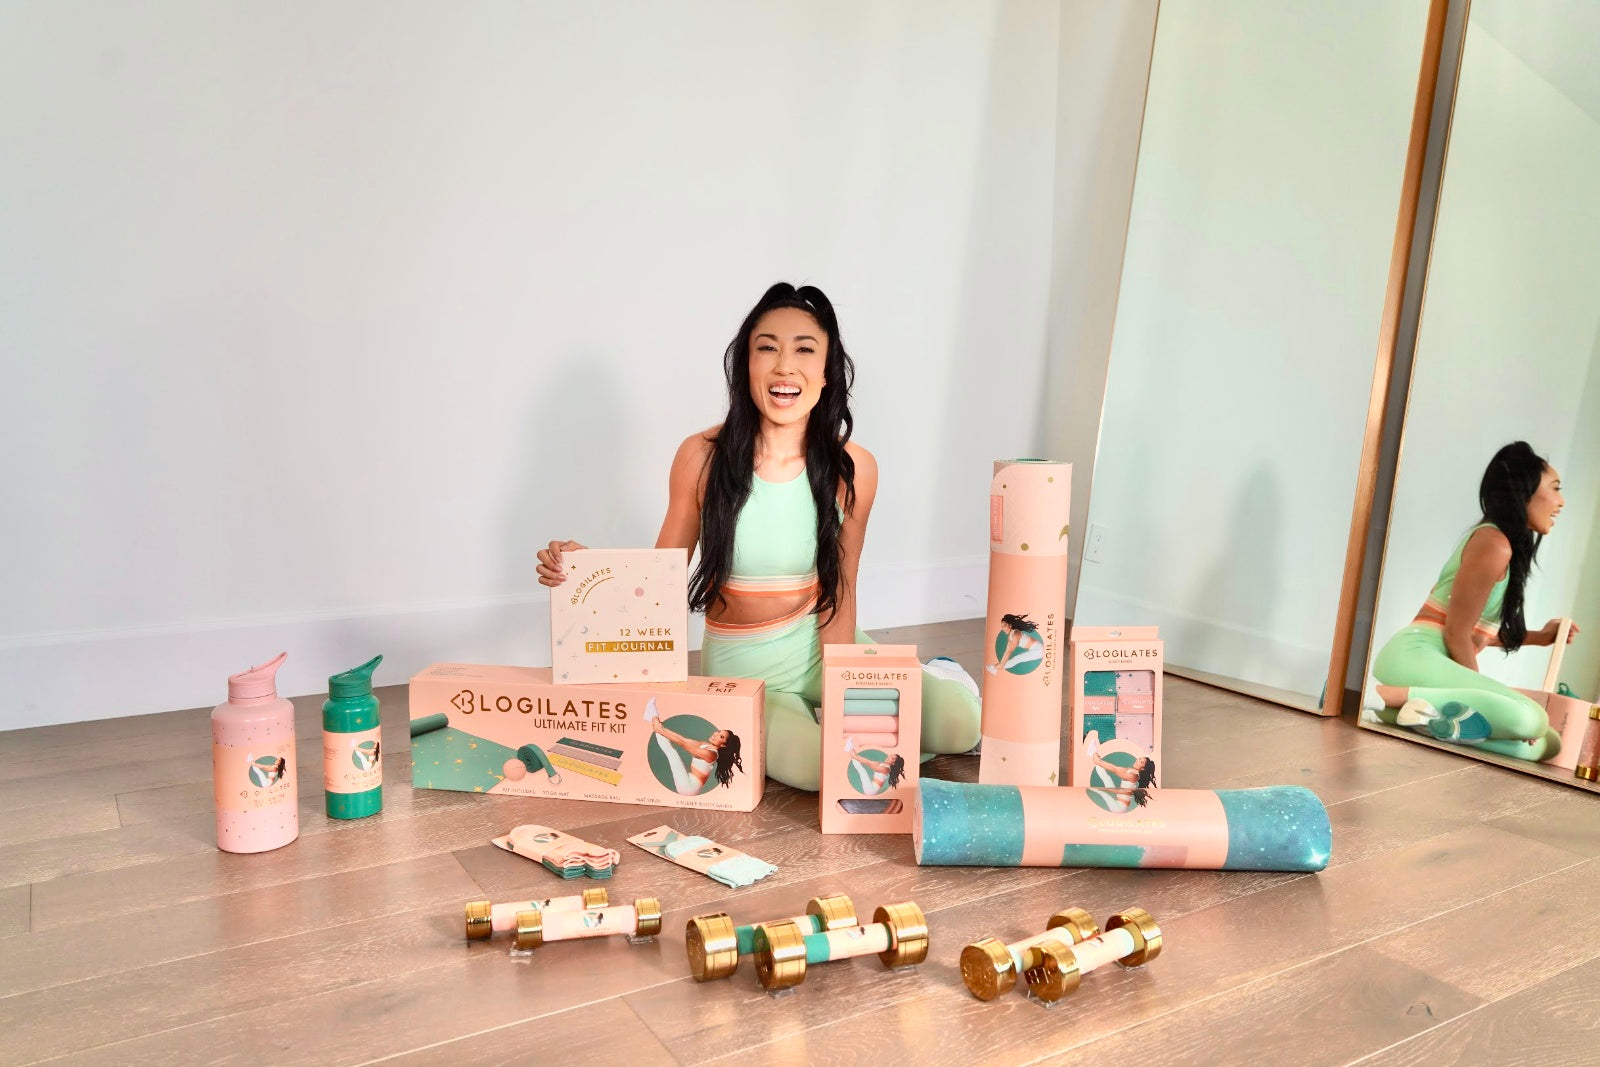 YouTuber Cassey Ho shows off her product collection